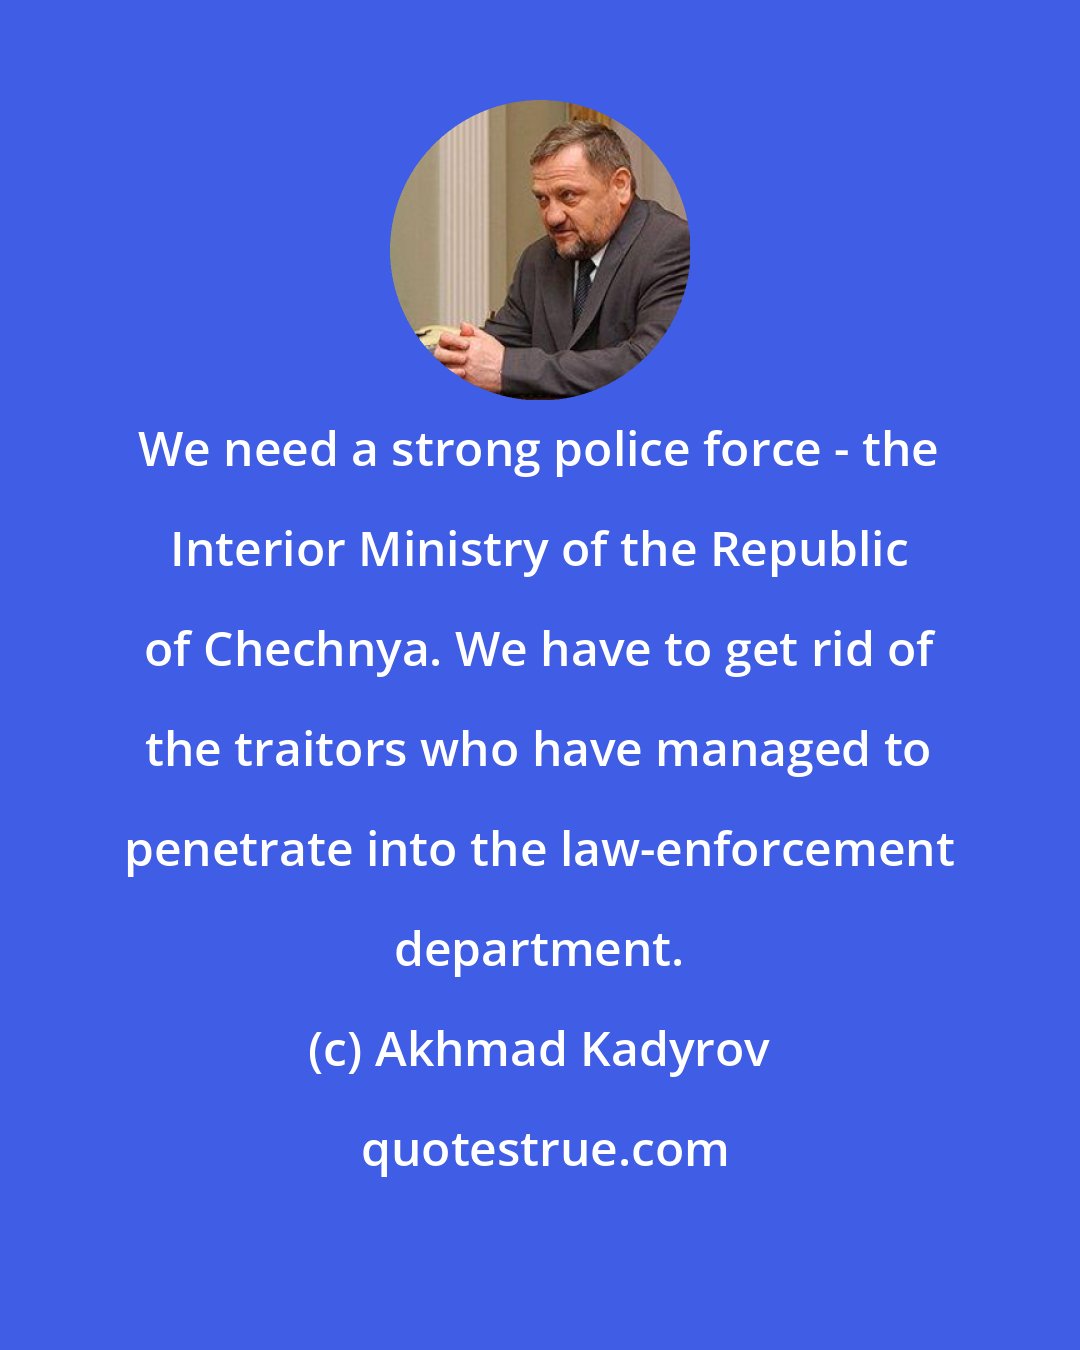 Akhmad Kadyrov: We need a strong police force - the Interior Ministry of the Republic of Chechnya. We have to get rid of the traitors who have managed to penetrate into the law-enforcement department.